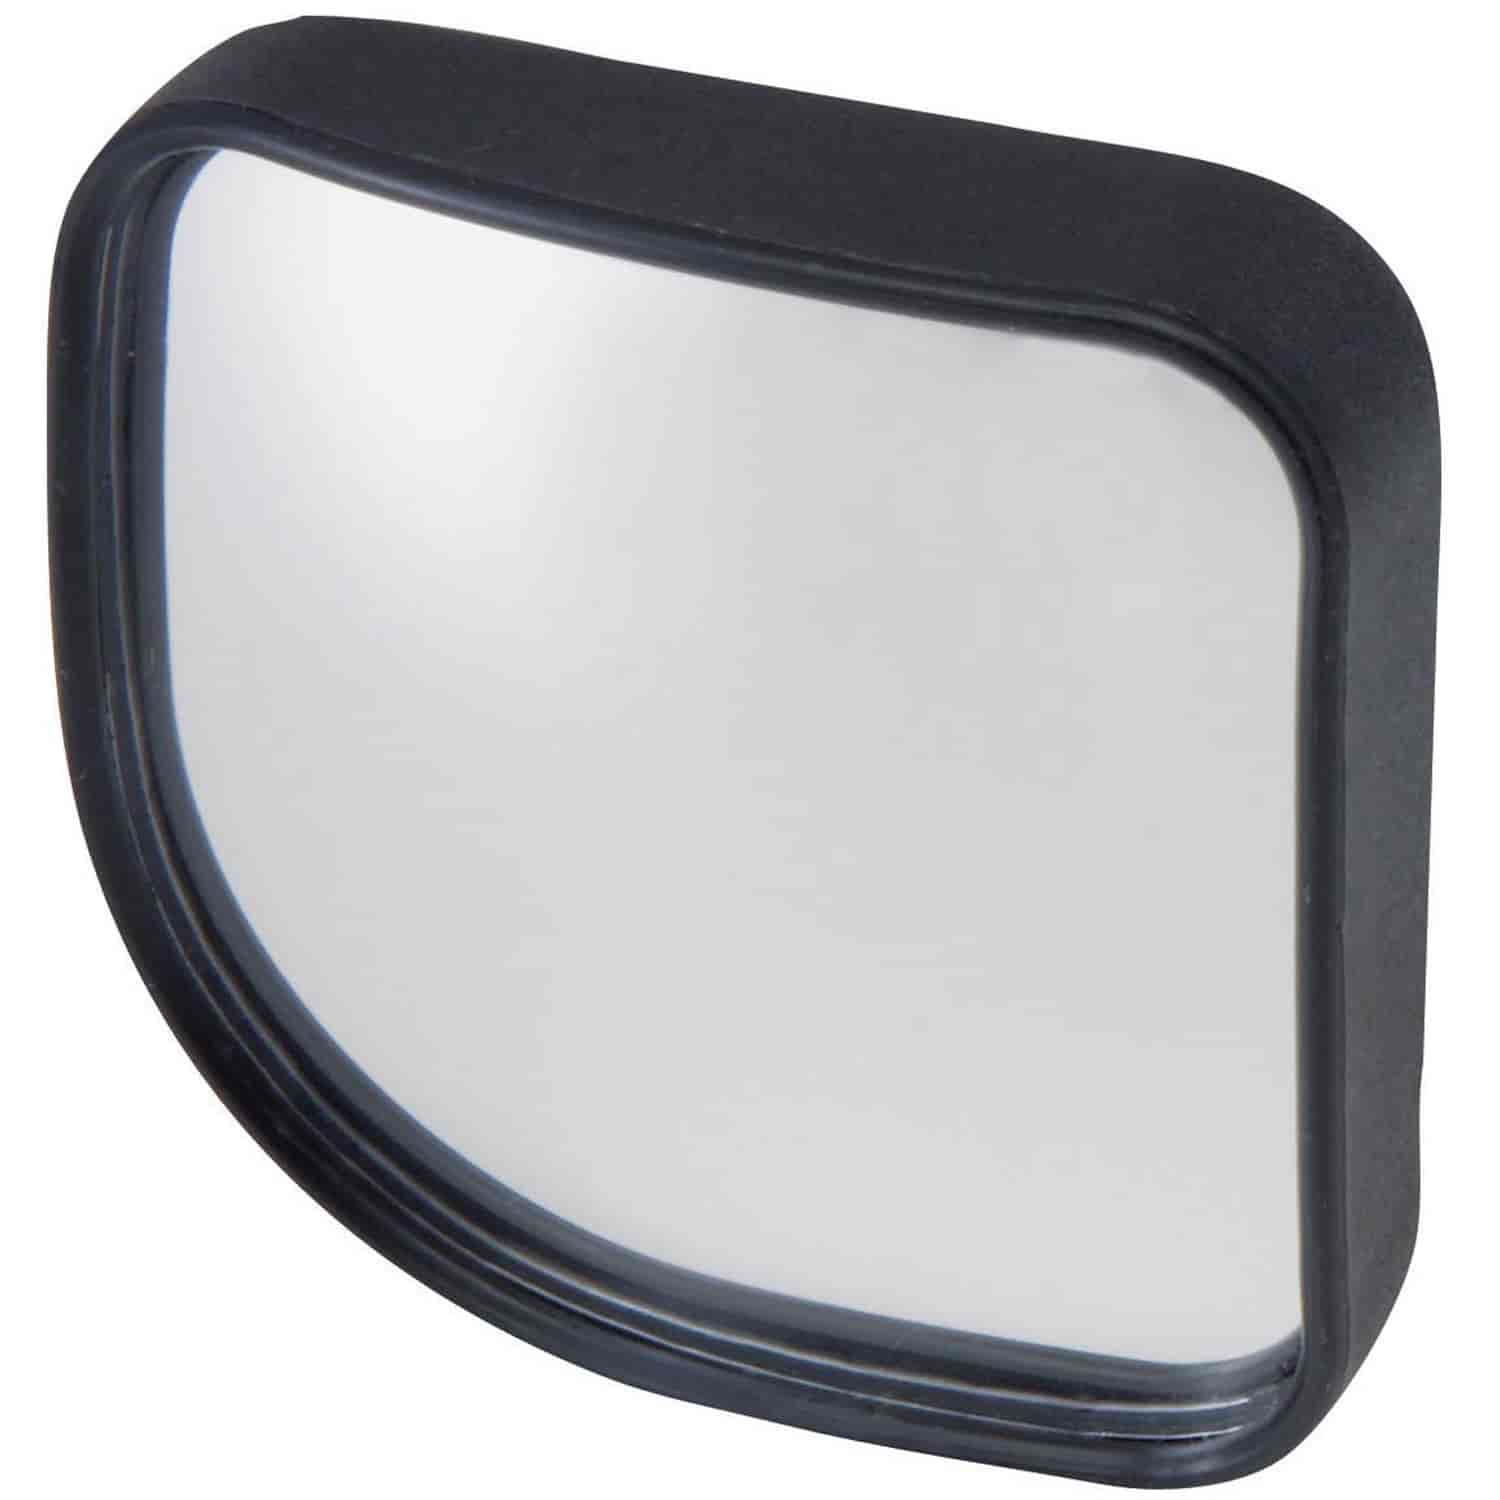 Stick-On Wedge Mirror This mirror is 2-1/8 inches wide and tall.